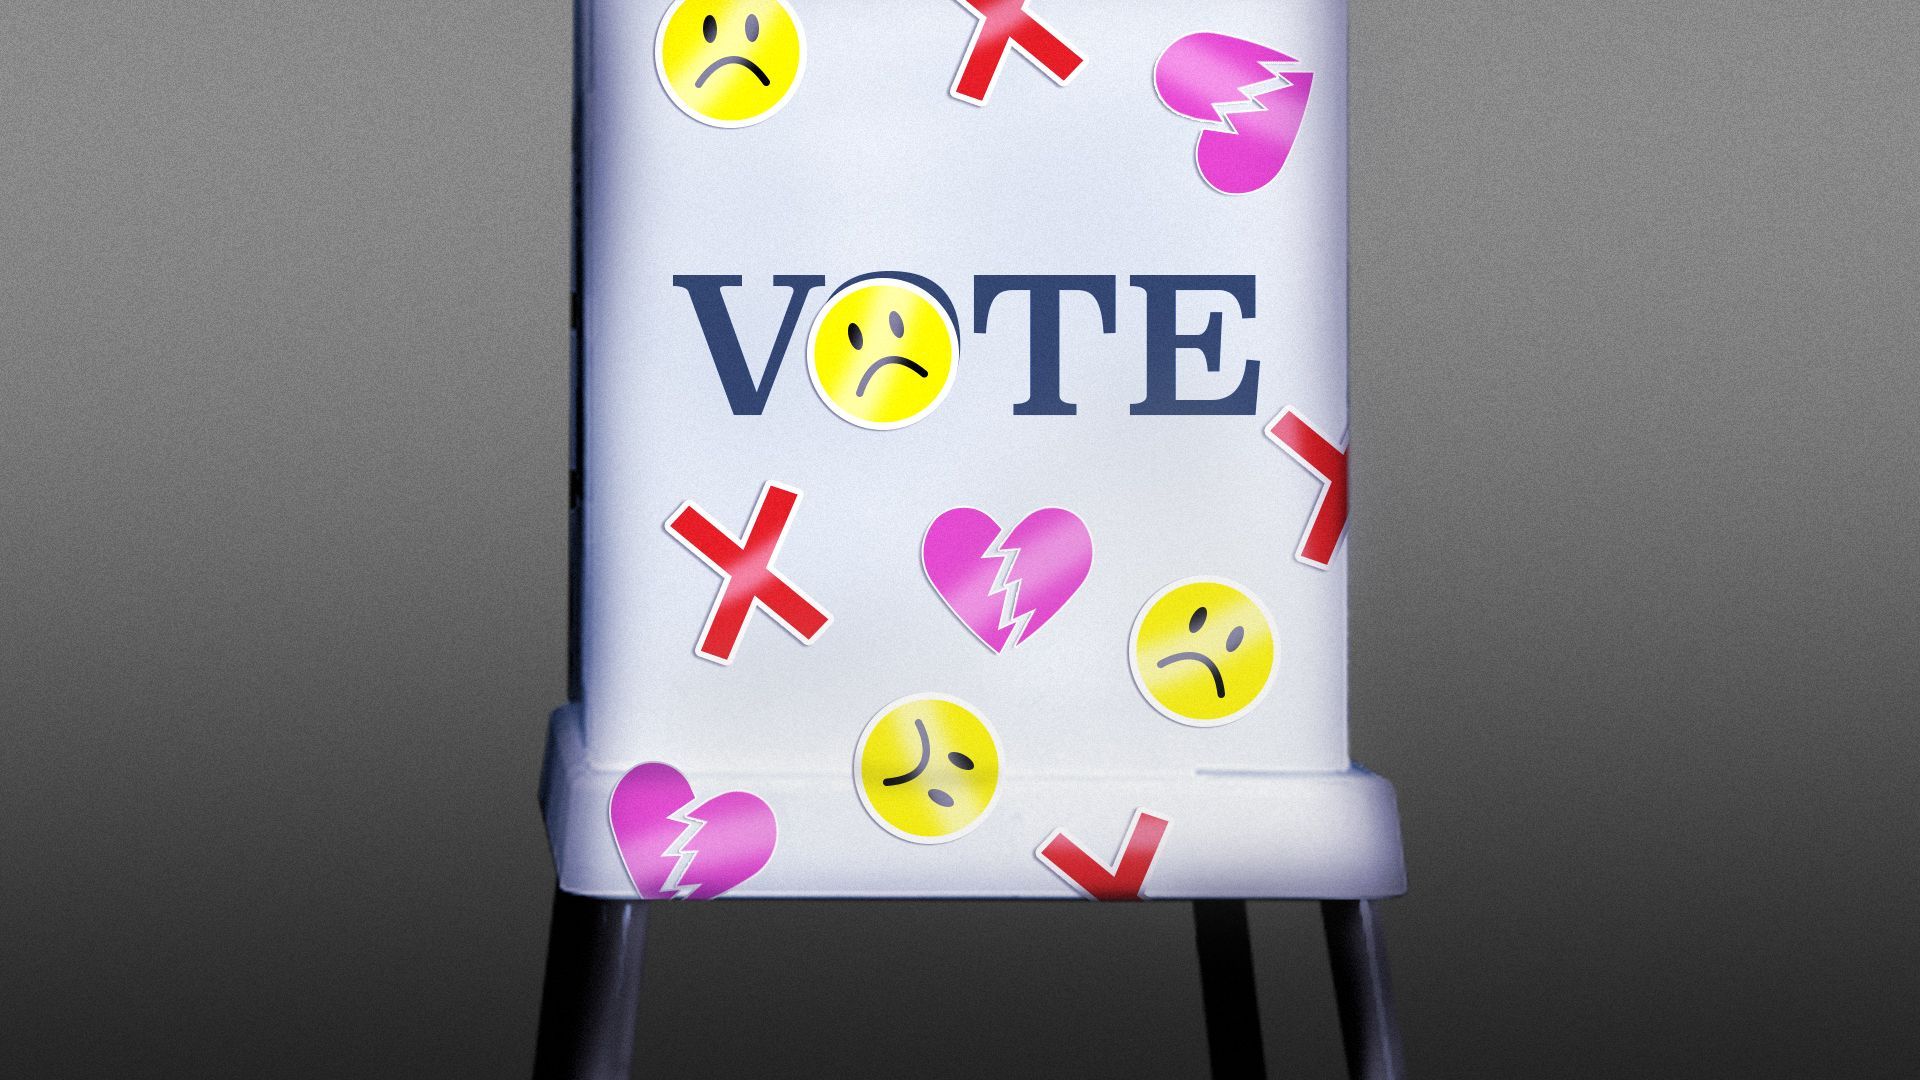 Illustration of a voting booth covered in stickers of X's, frowning faces and broken hearts.